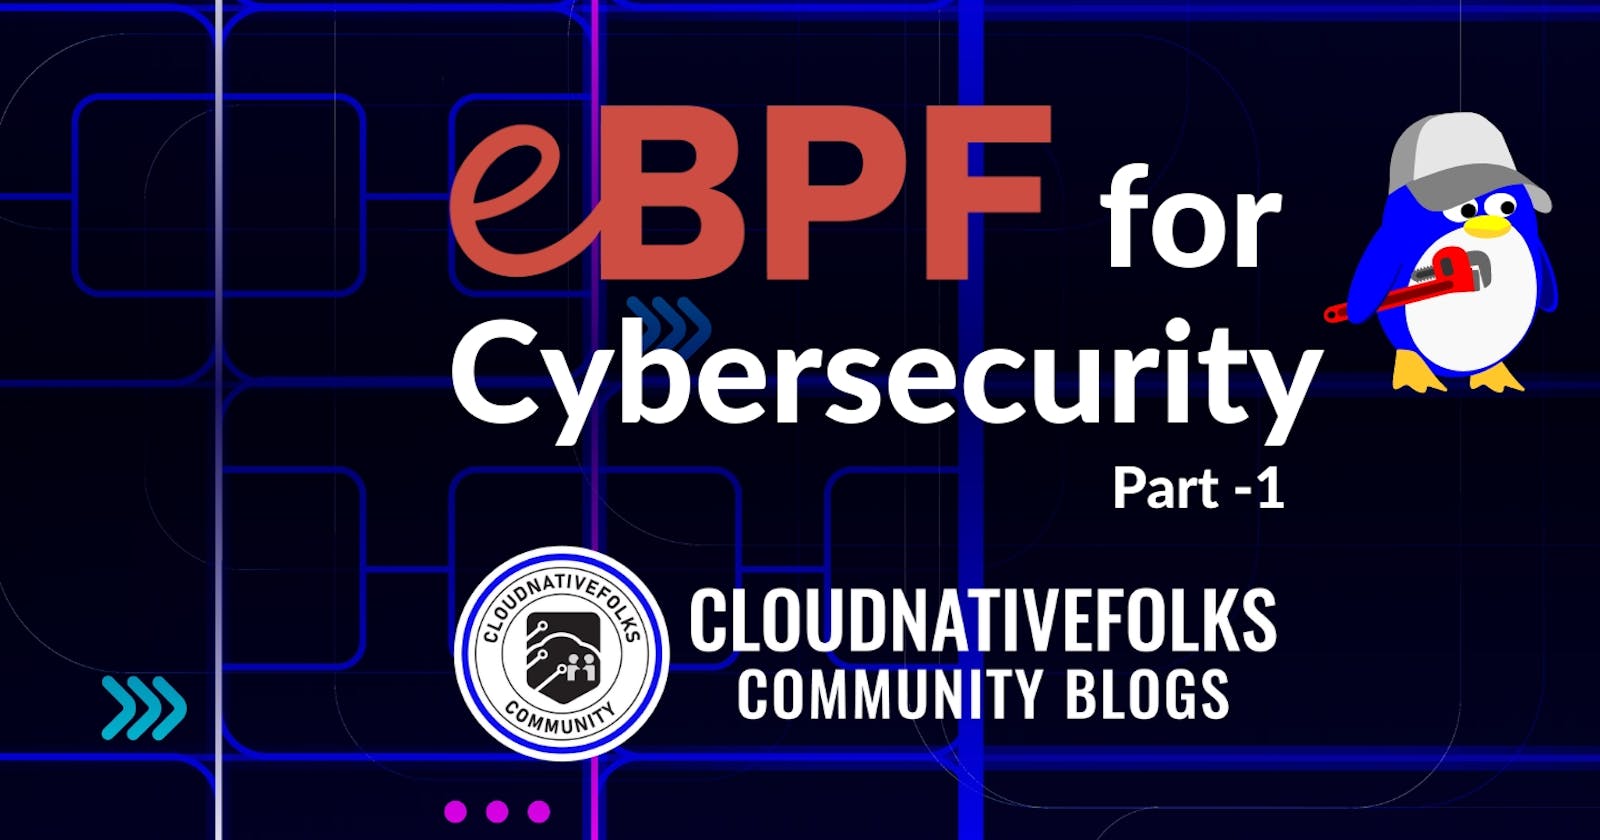 eBPF for Cybersecurity - Part 1